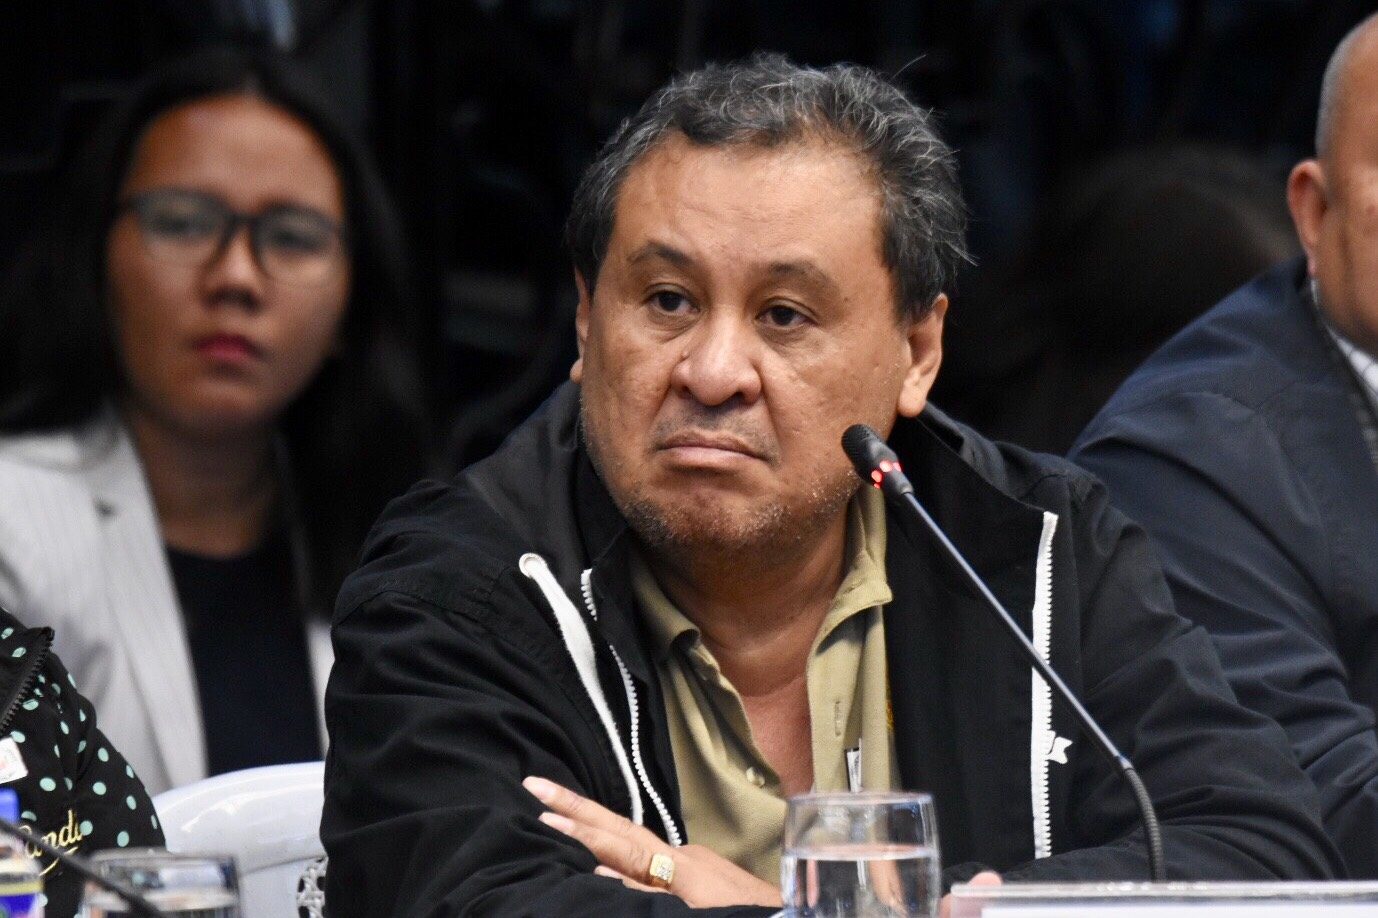 DENIAL. Bilibid hospital doctor Urcisio Cenas denies involvement in the anomalies in the penitentiary's hospital. Photo by Angie de Silva/Rappler 